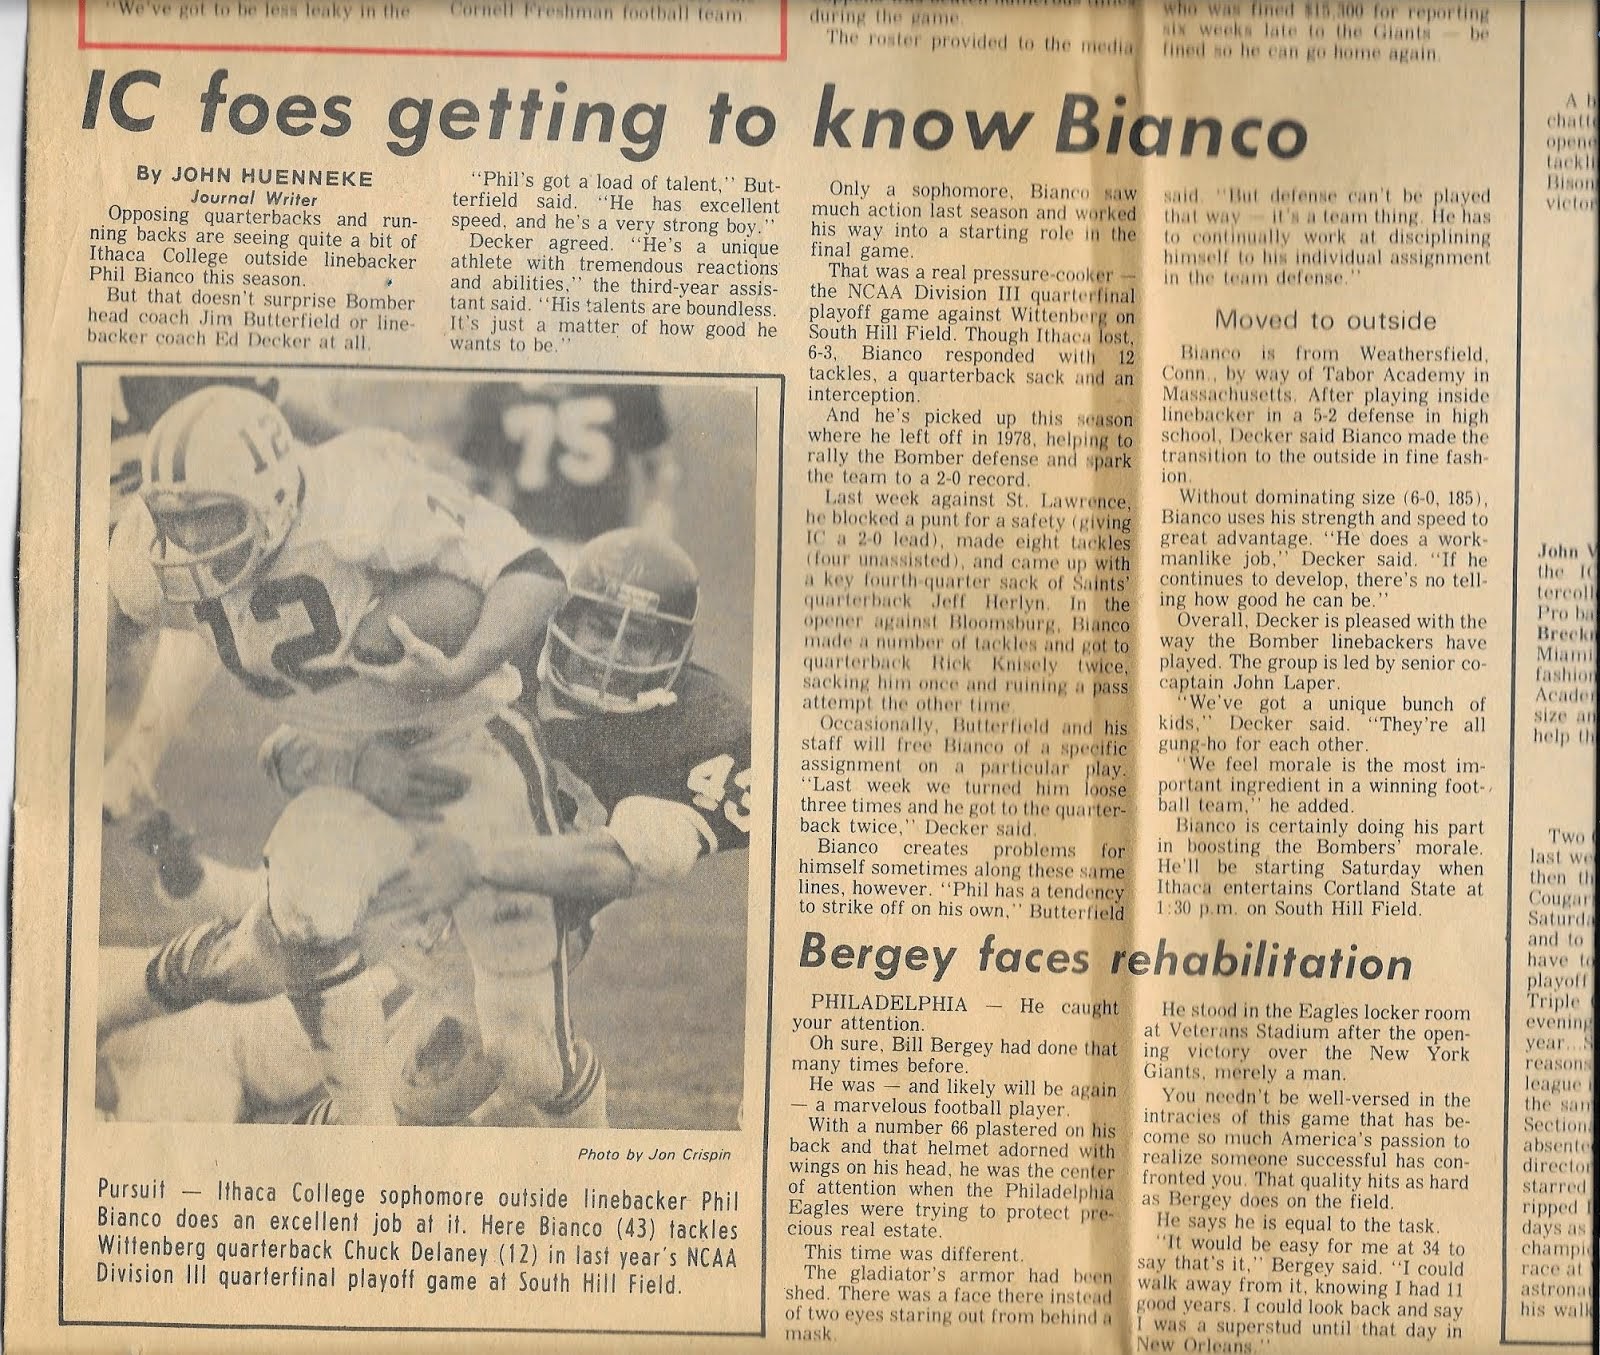 I found a better copy of this article Phillip Bianco #43